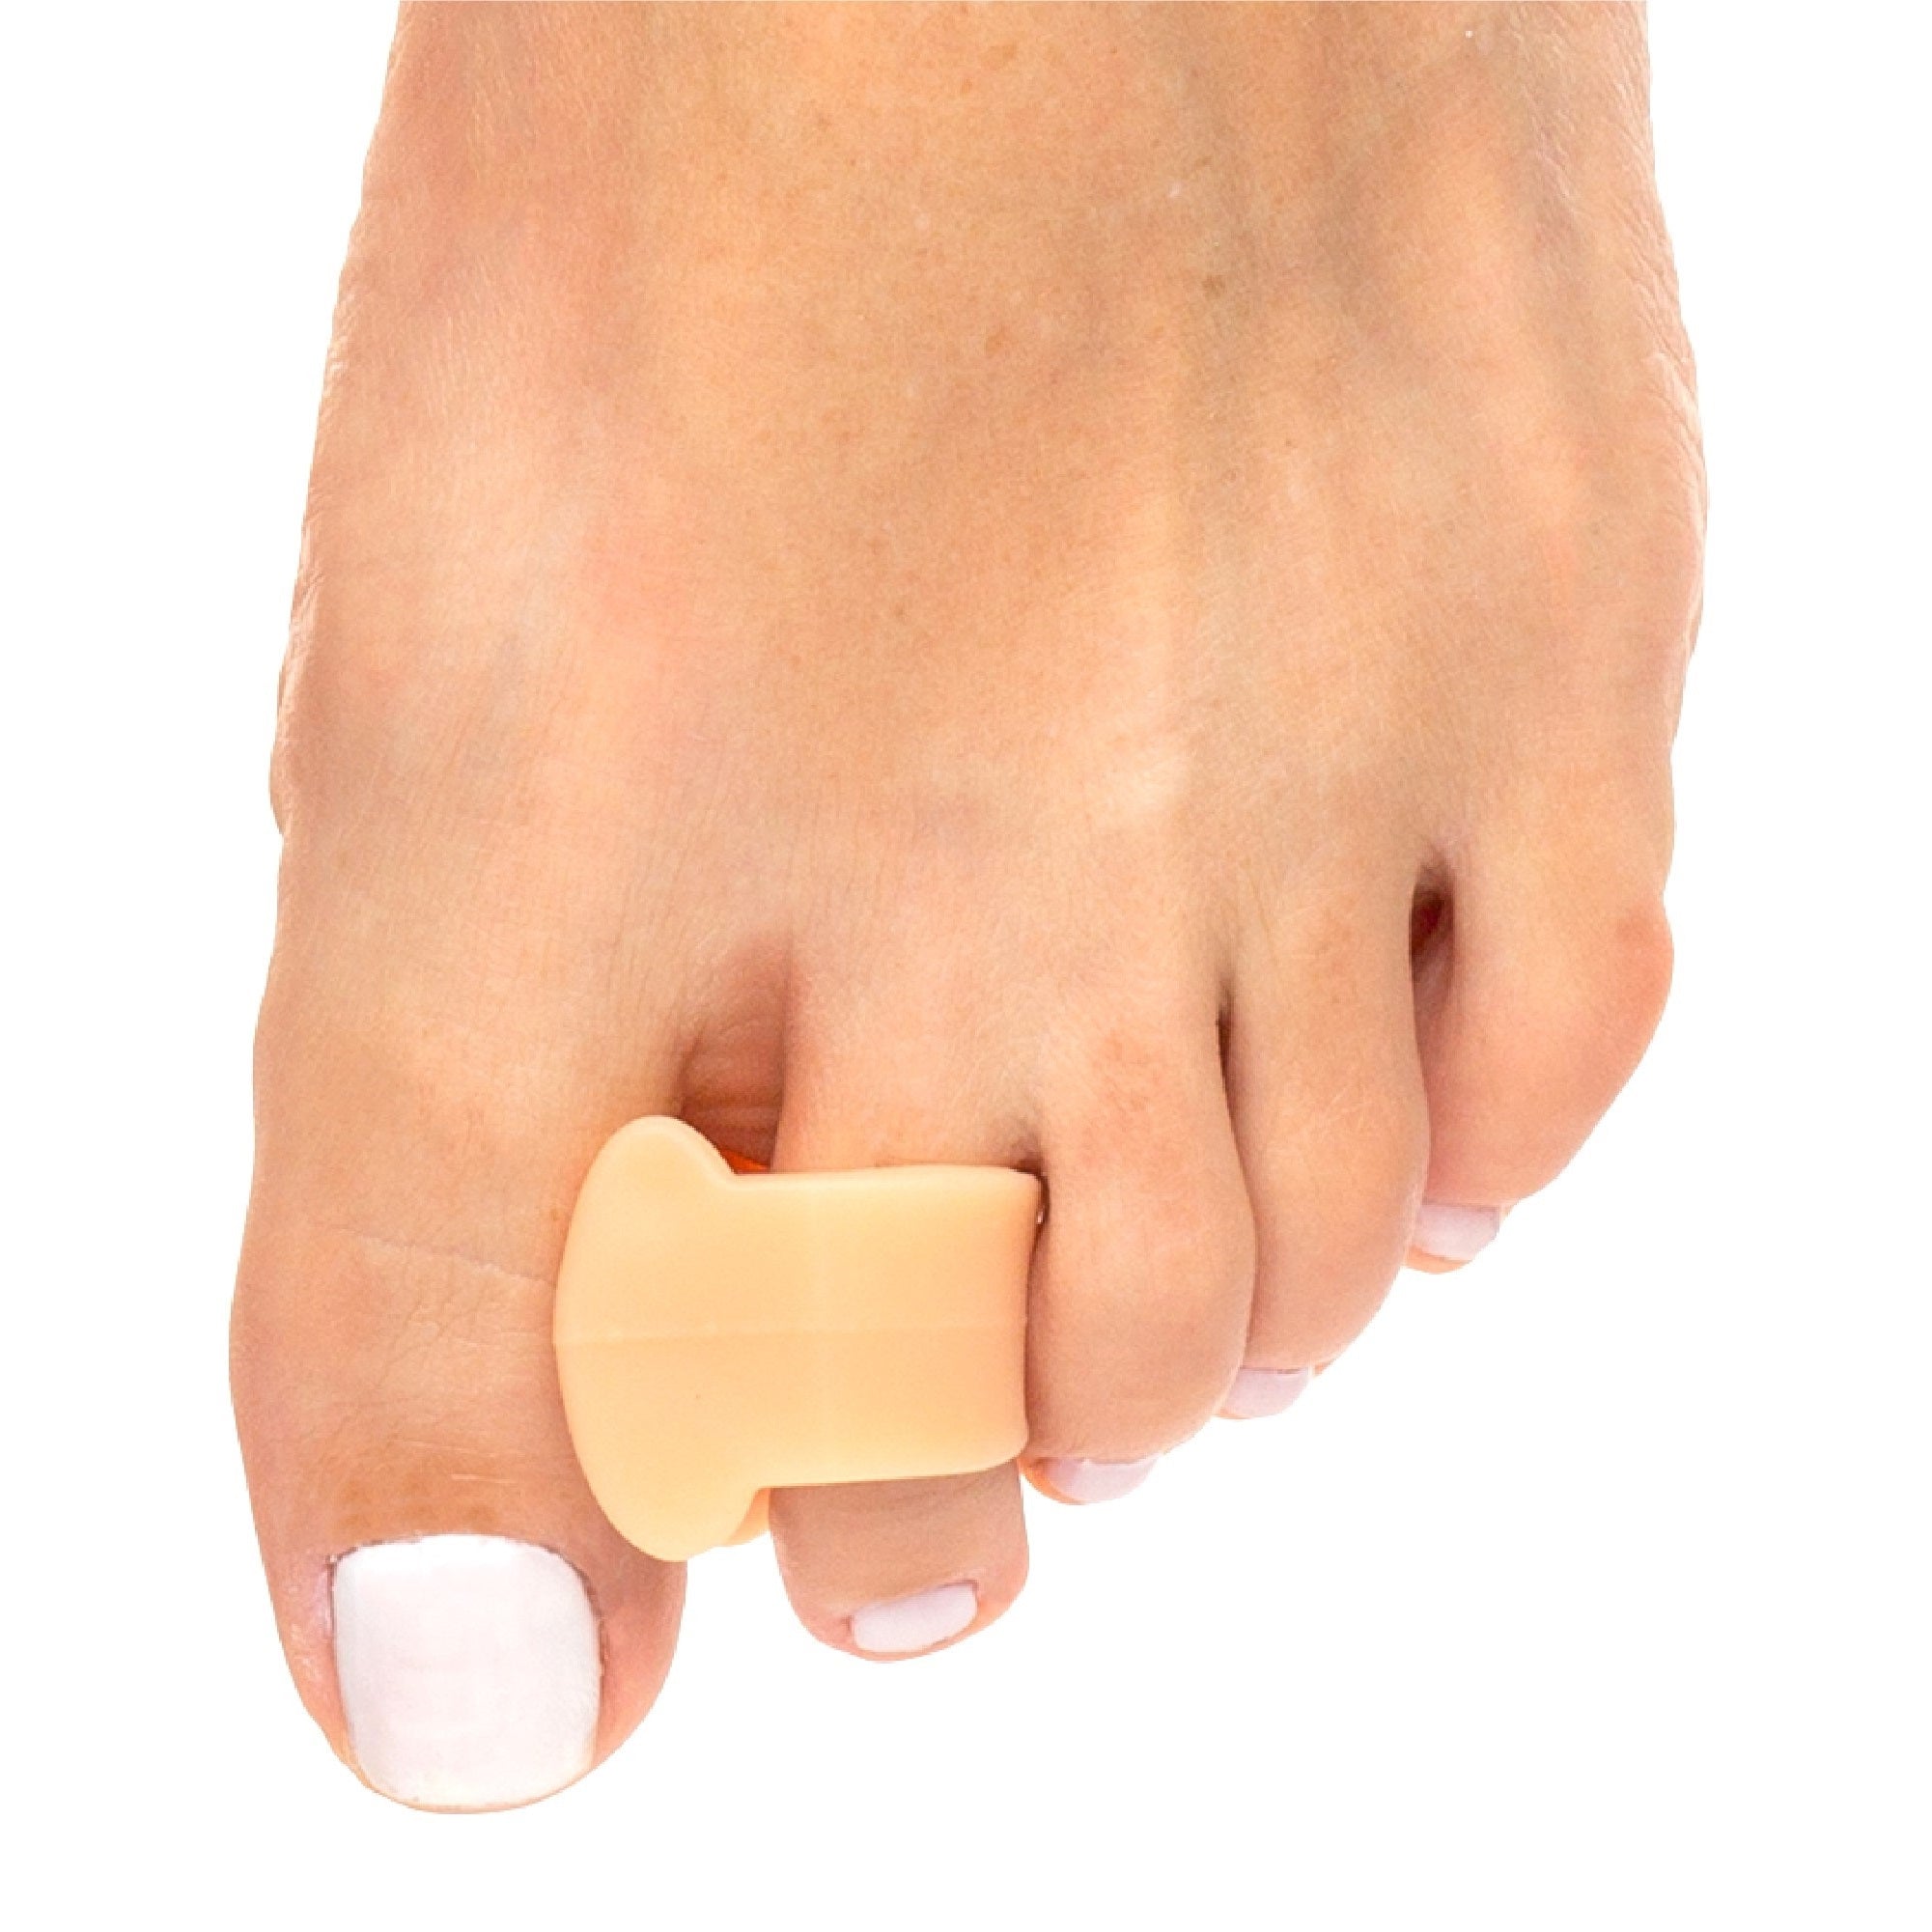 ZenToes 4 Silicone Toe Spacers Correct Toe Alignment, Bunion